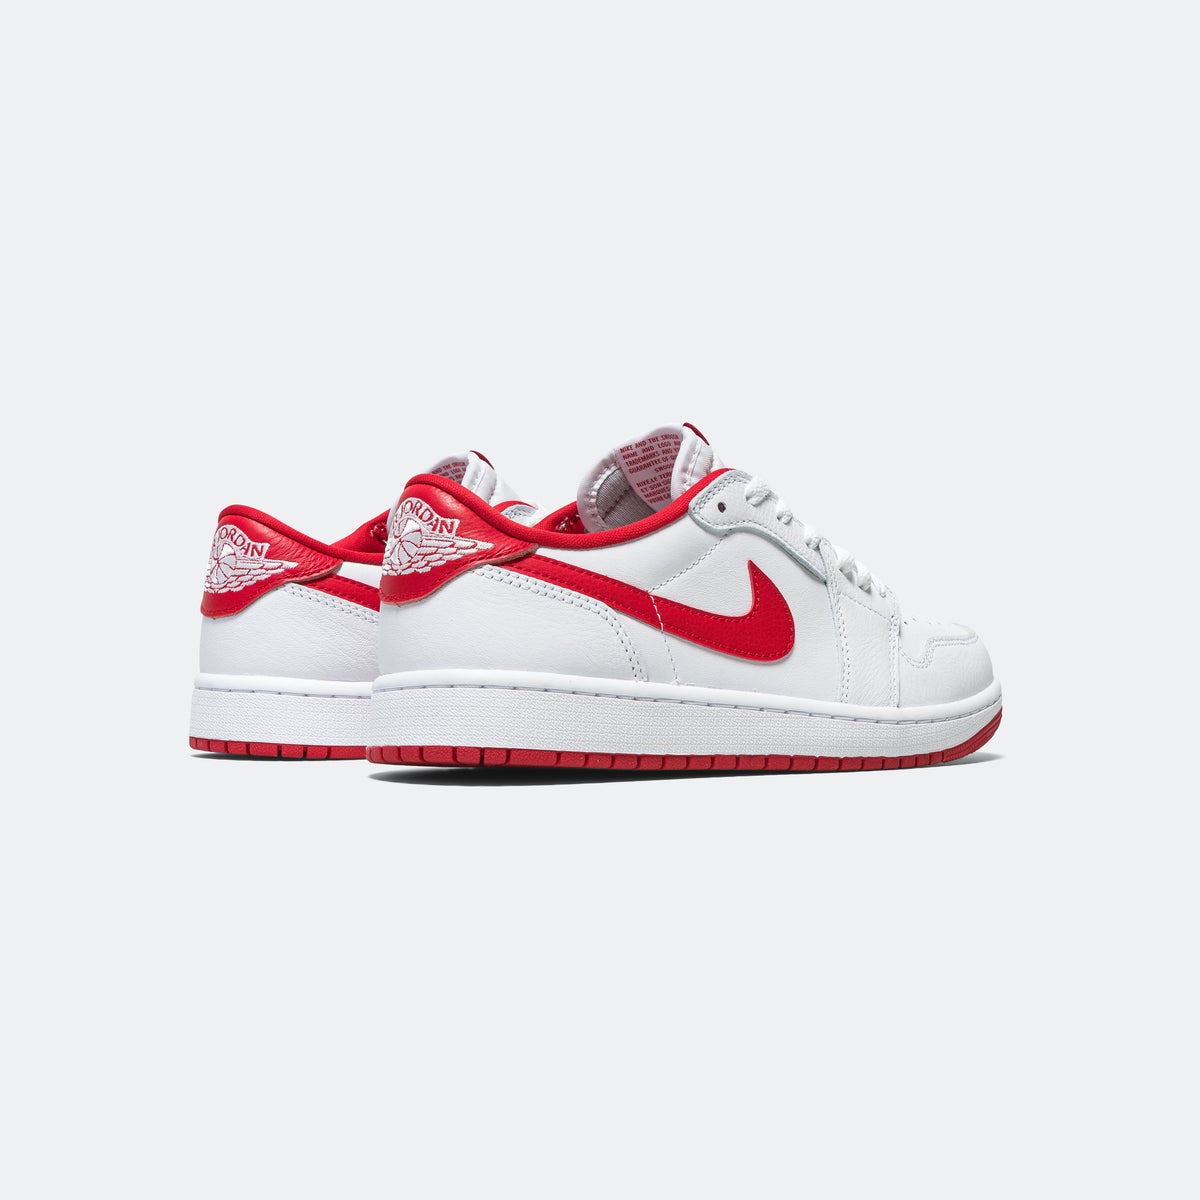 Nike Air Jordan 1 Low - White/University Red | UP THERE